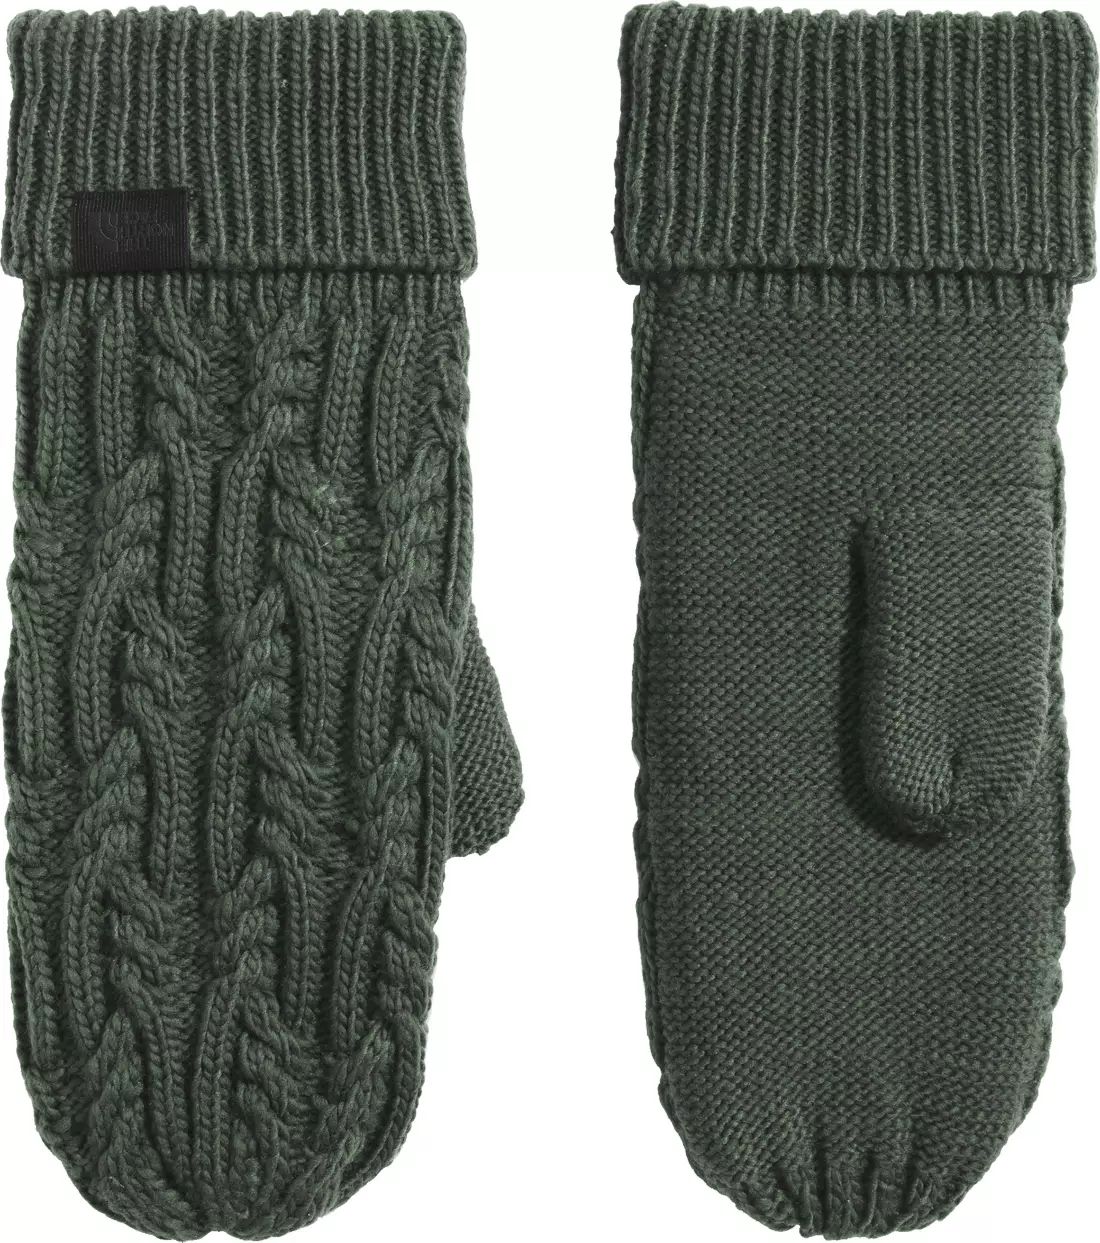 The North Face Women's Oh Mega Mittens | Dick's Sporting Goods | Dick's Sporting Goods